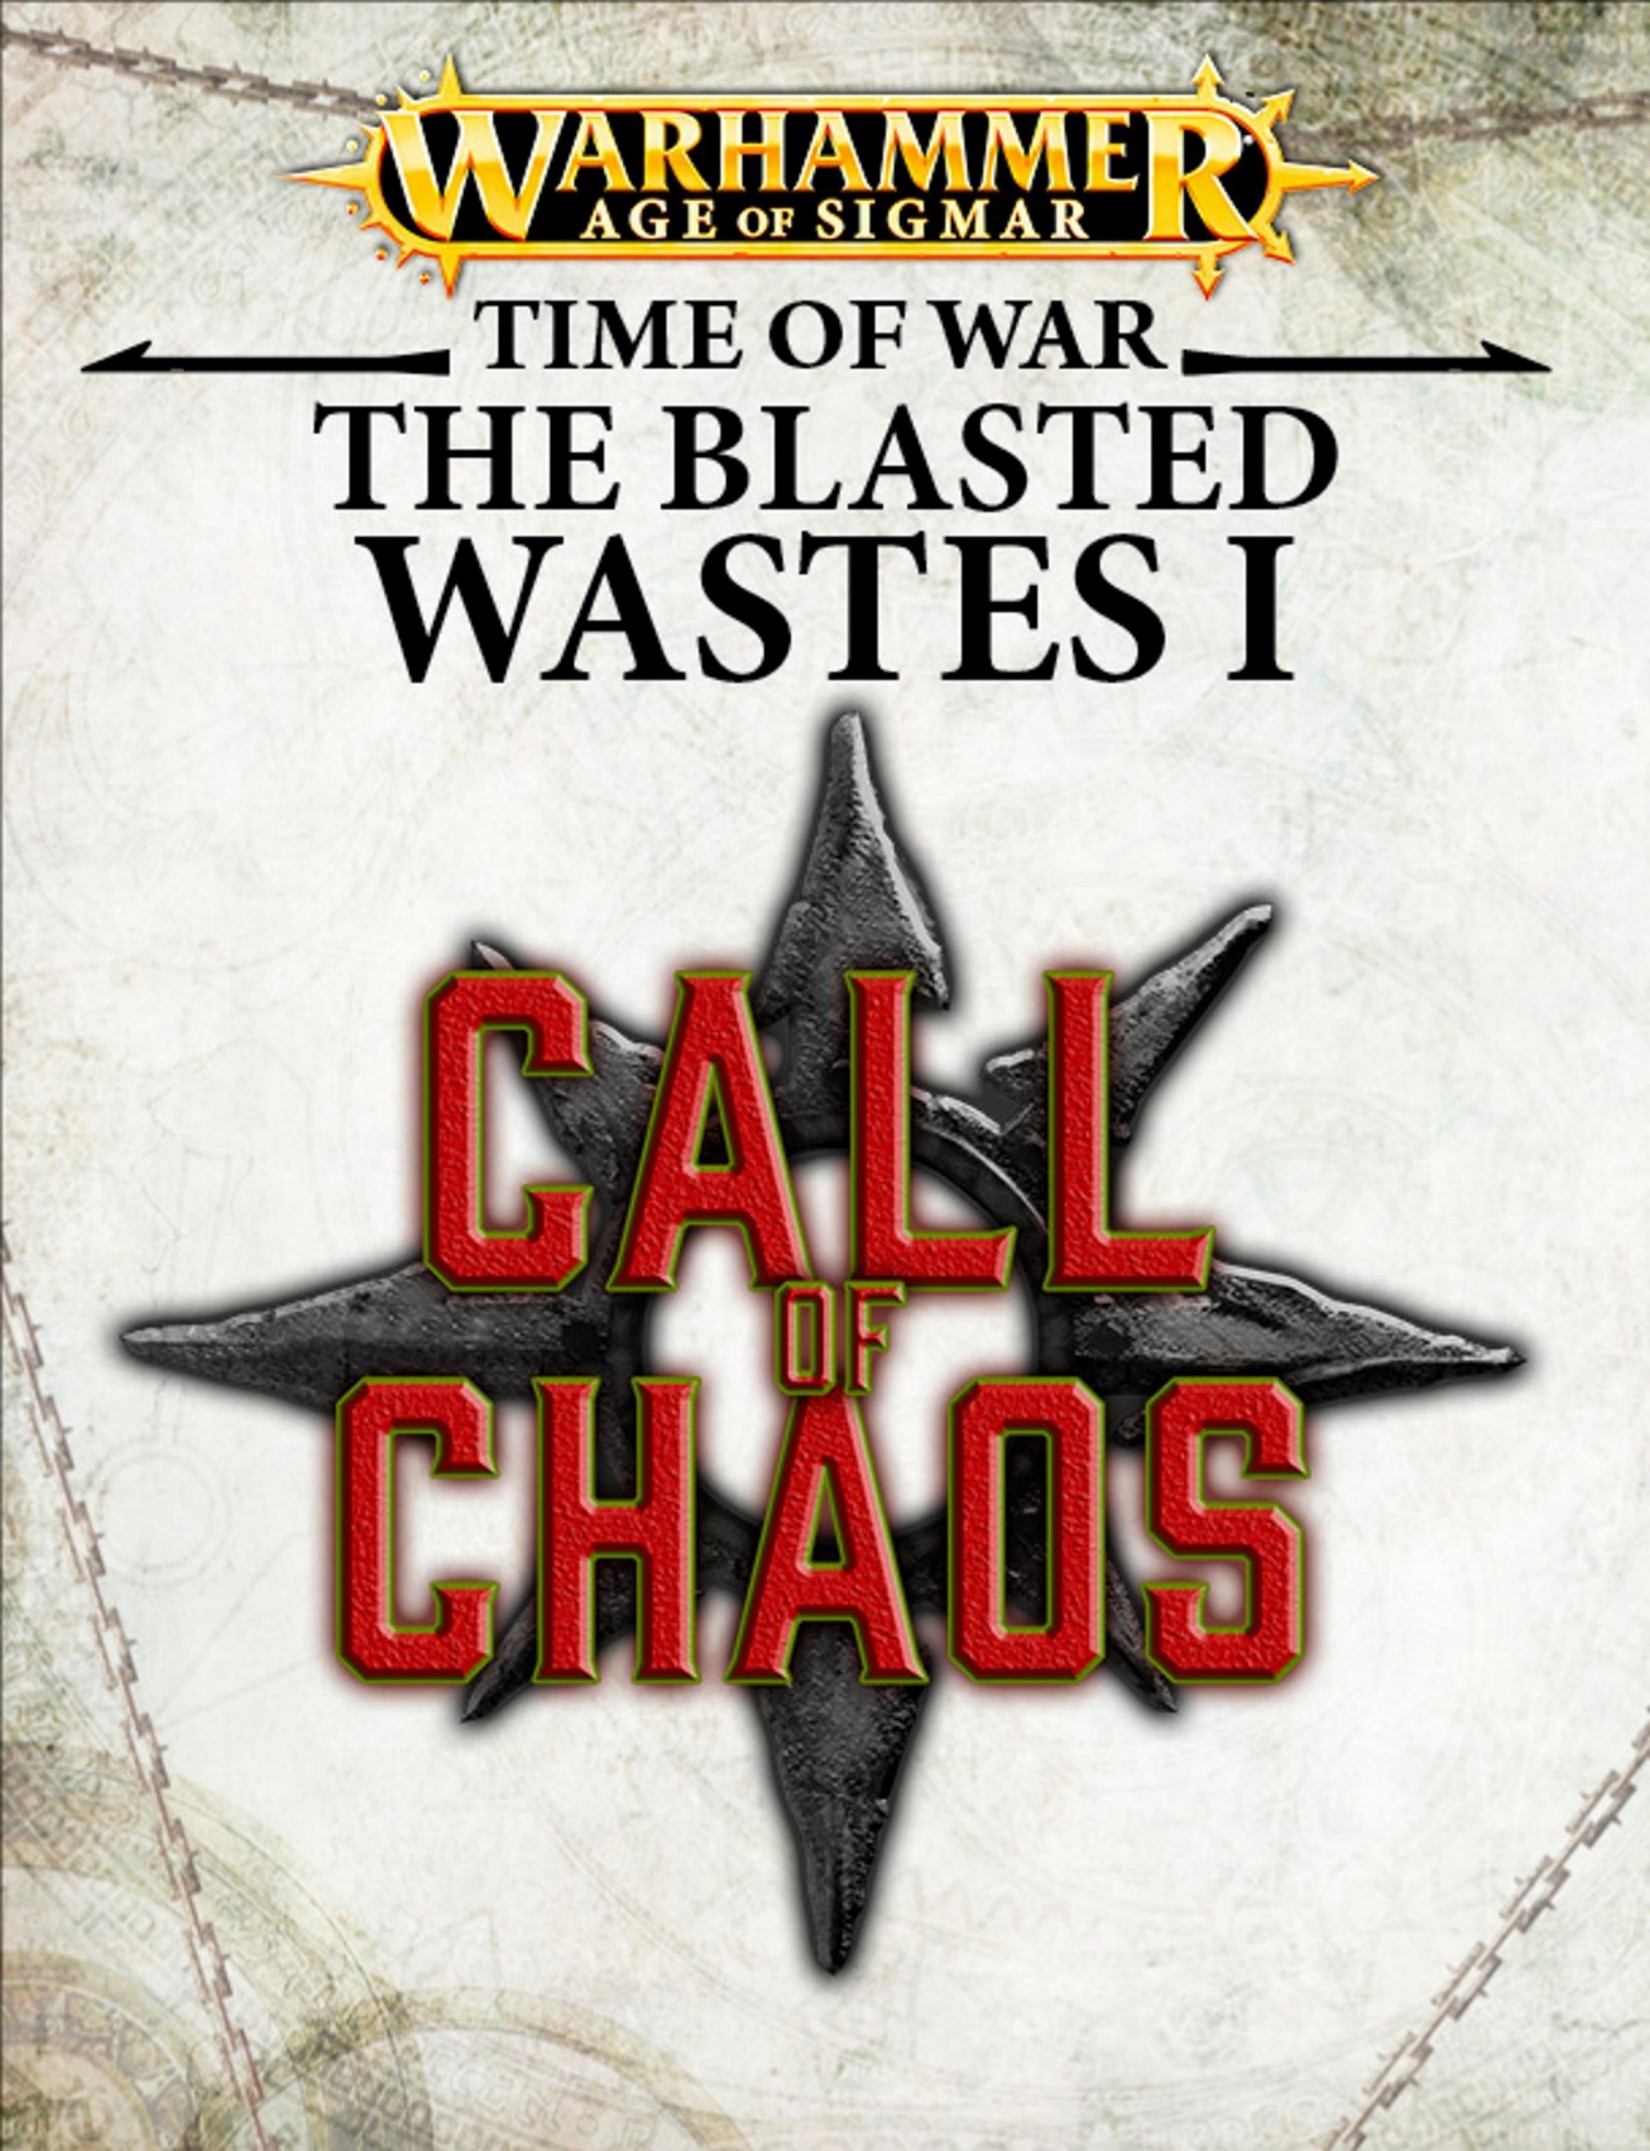 Warhammer: Age of Sigmar - Time of War - The Blasted Wastes